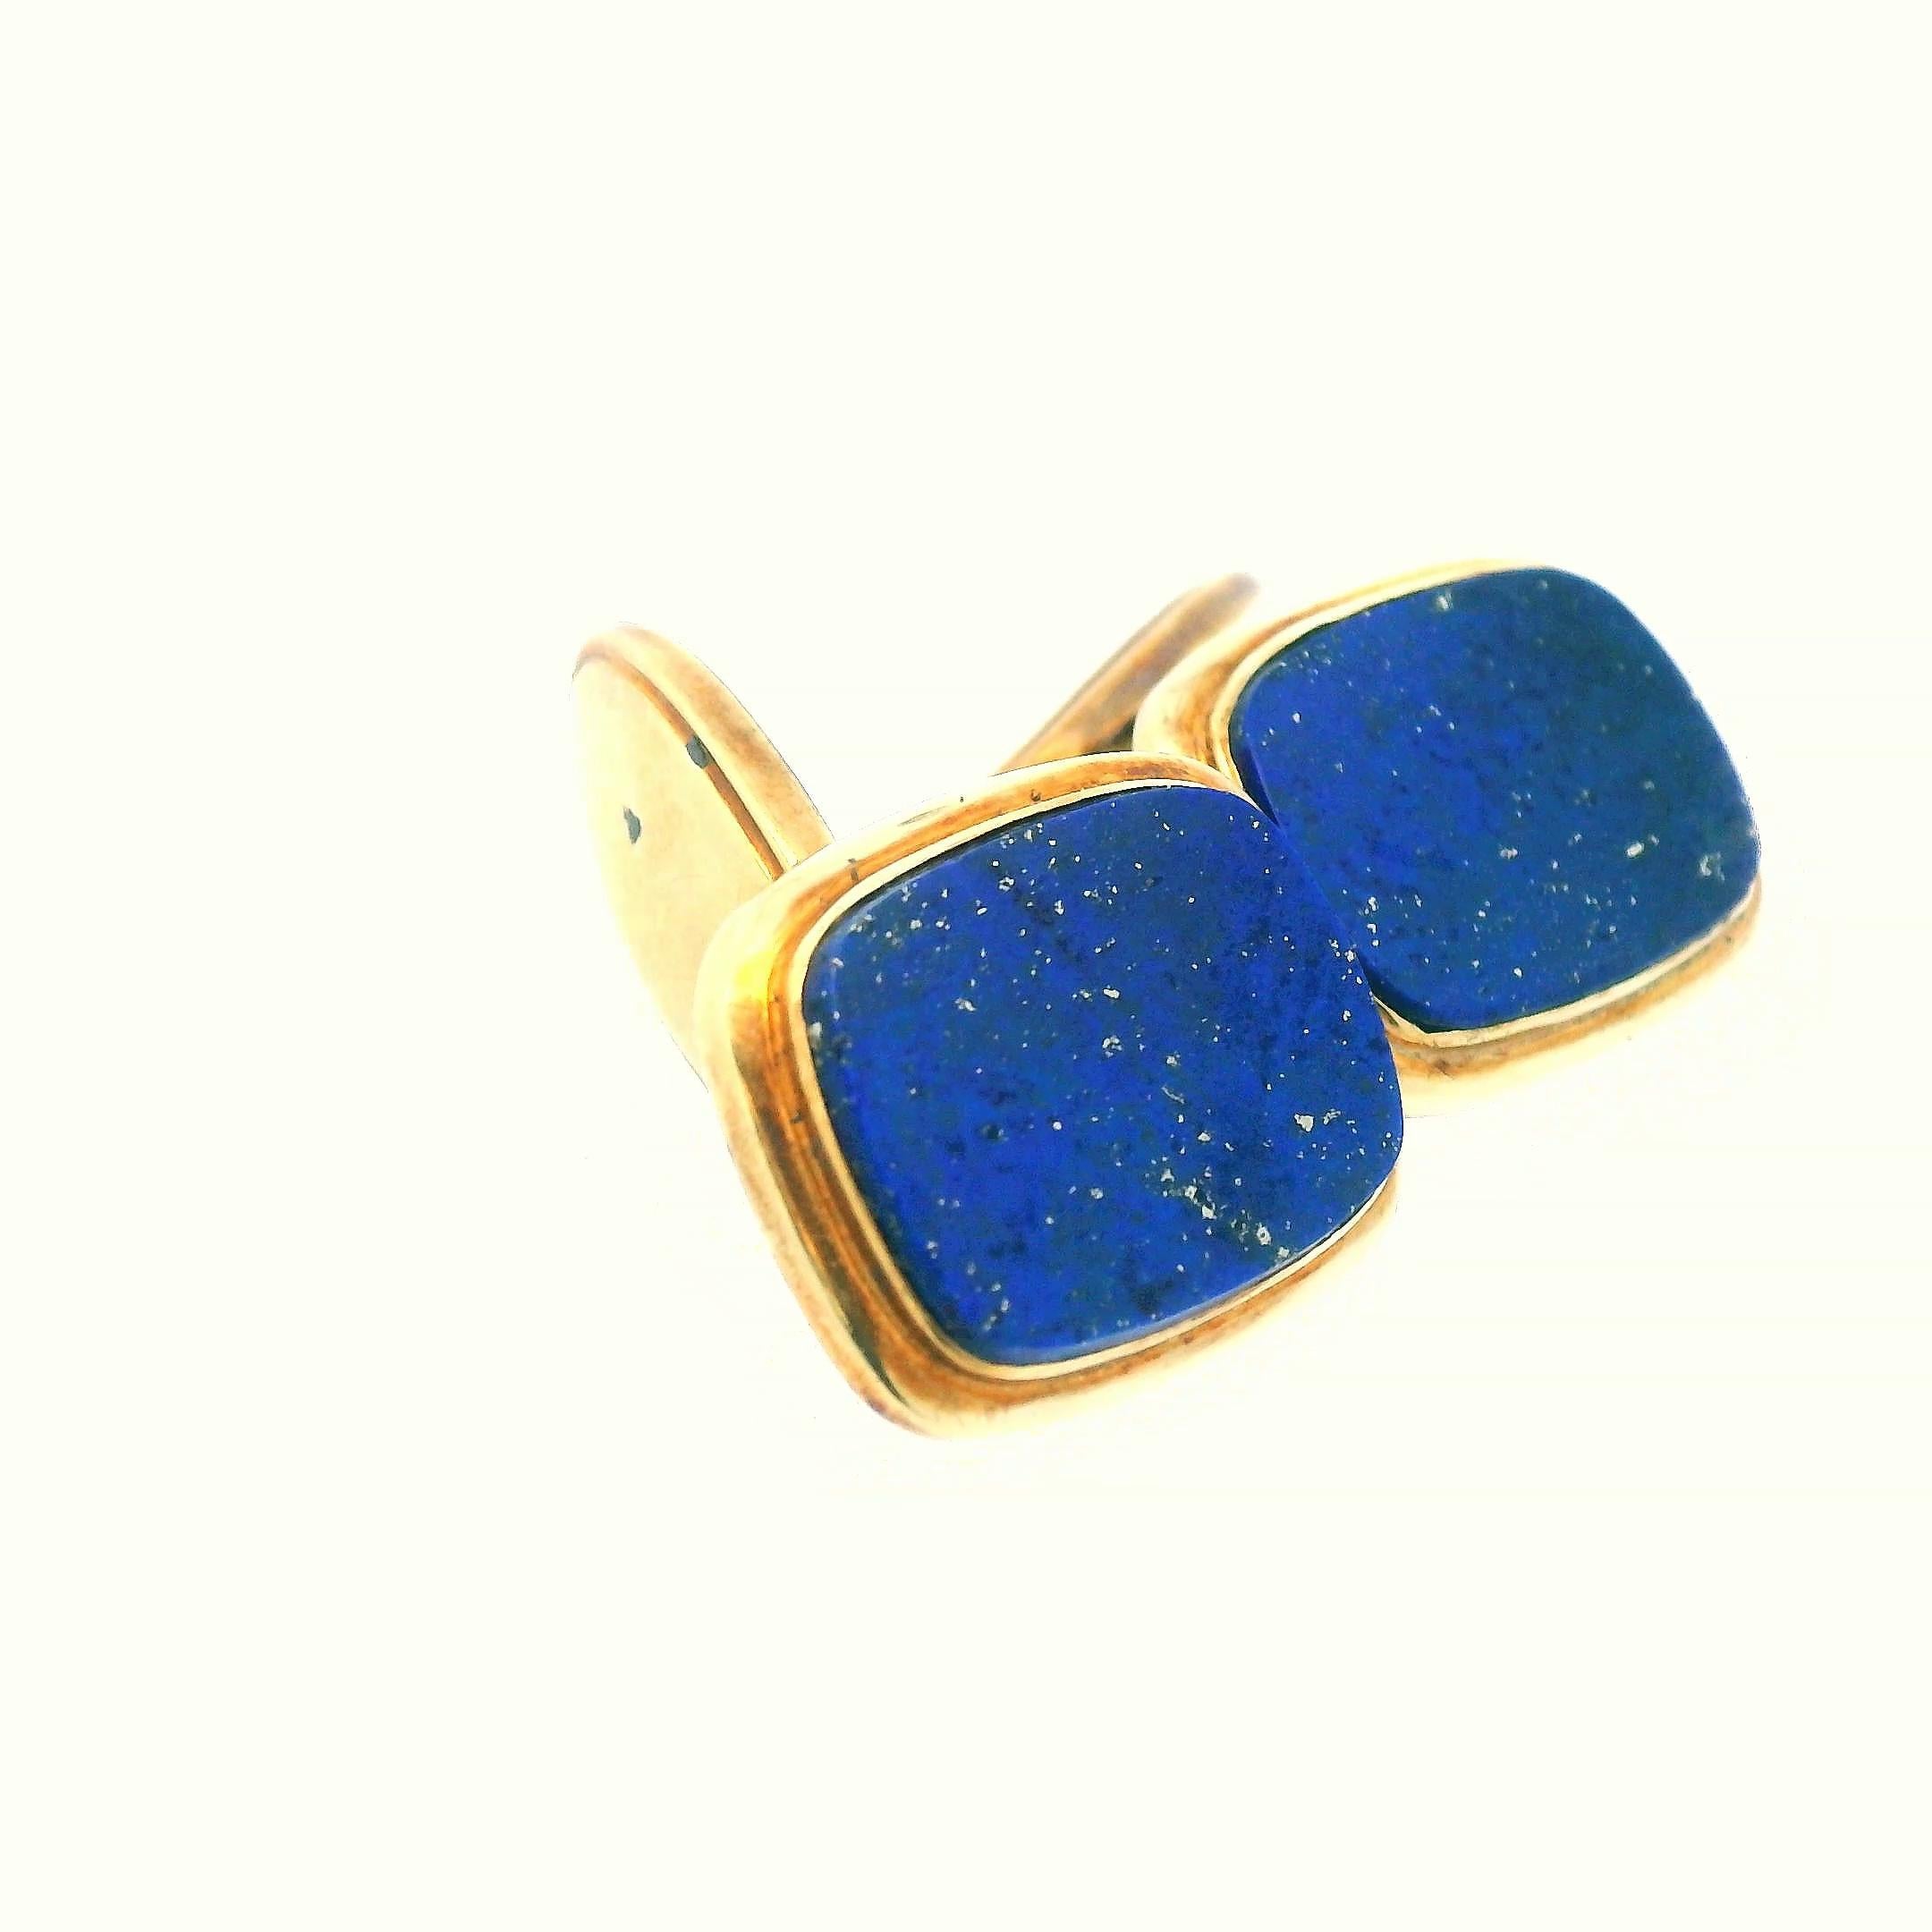 This stunning pair of cufflinks from West Germany were made with 14k yellow gold and a rich blue lapis. These cufflinks embody sophistication and luxury. Each cufflinks features polished 14k yellow gold. The rich hie of gold creates a striking